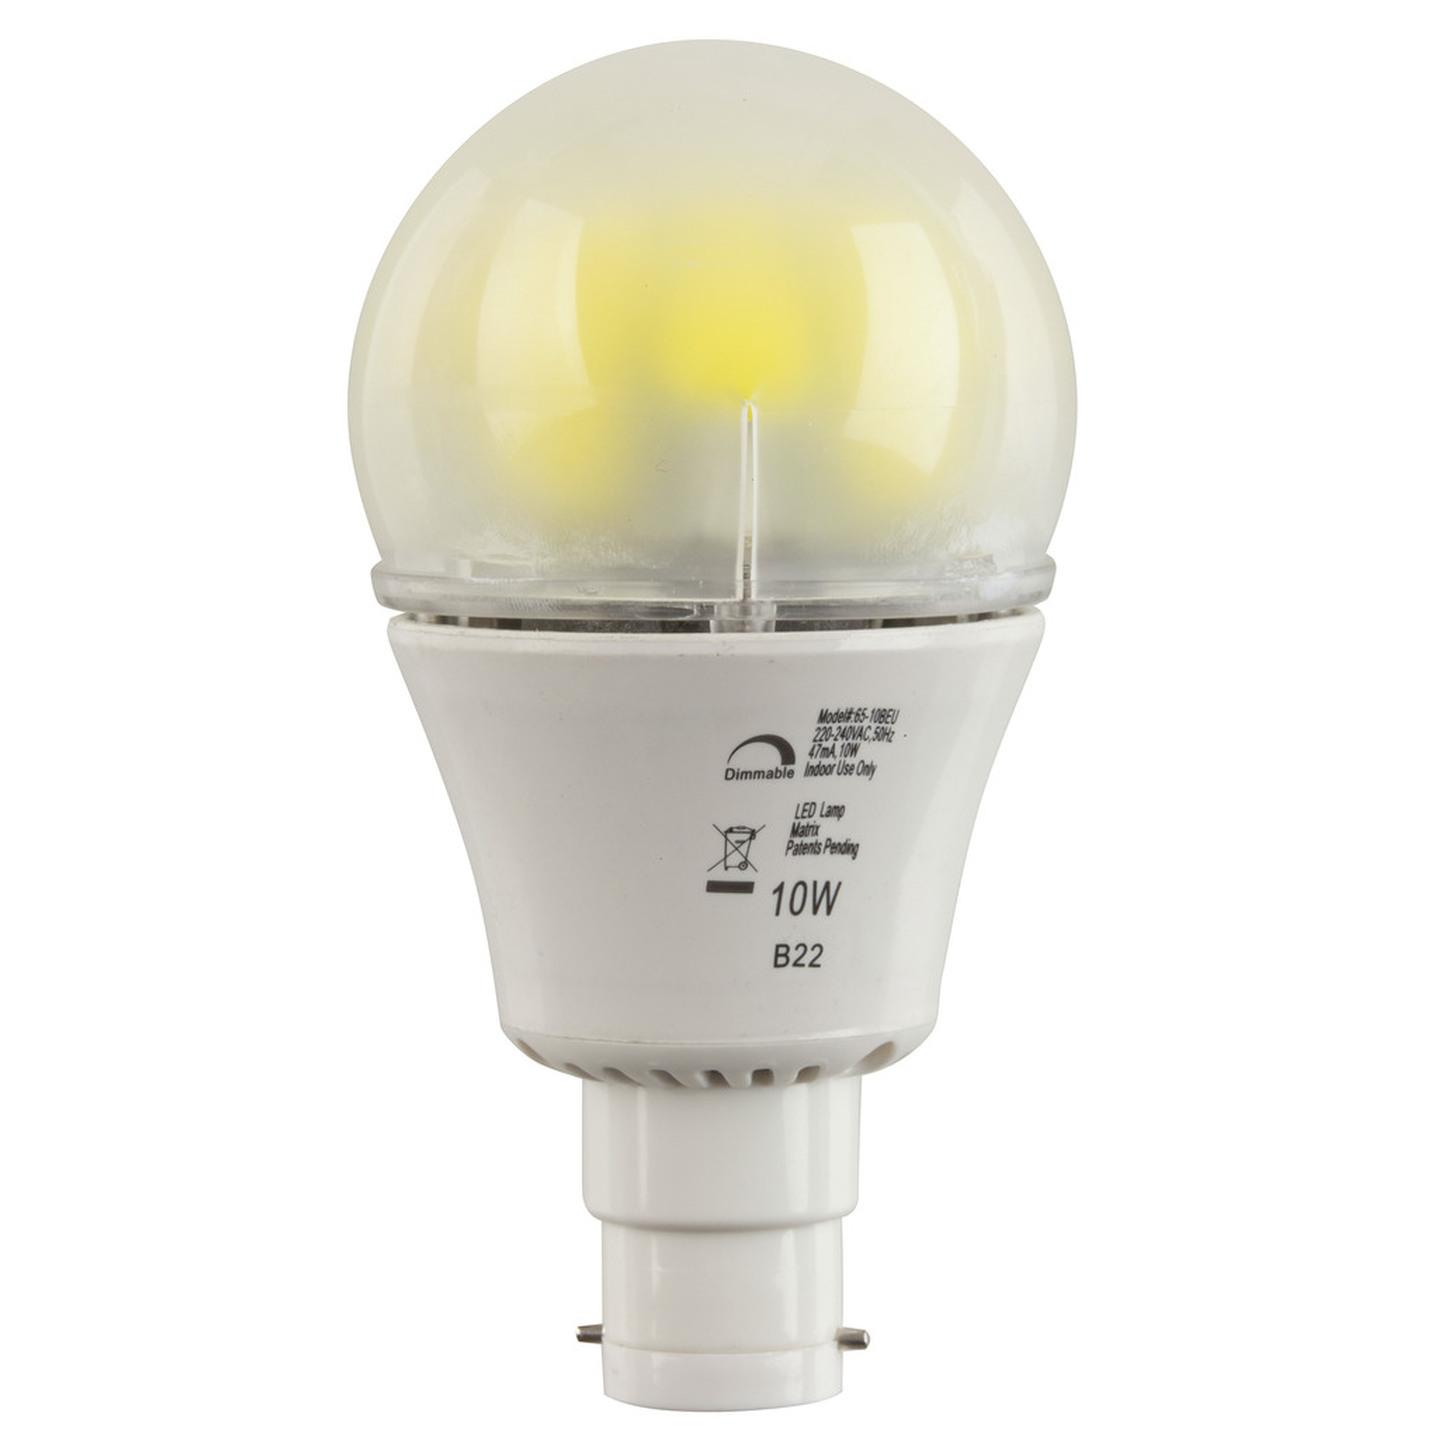 10W Dimmable Mains LED Light Globe Natural White Bayonet cap